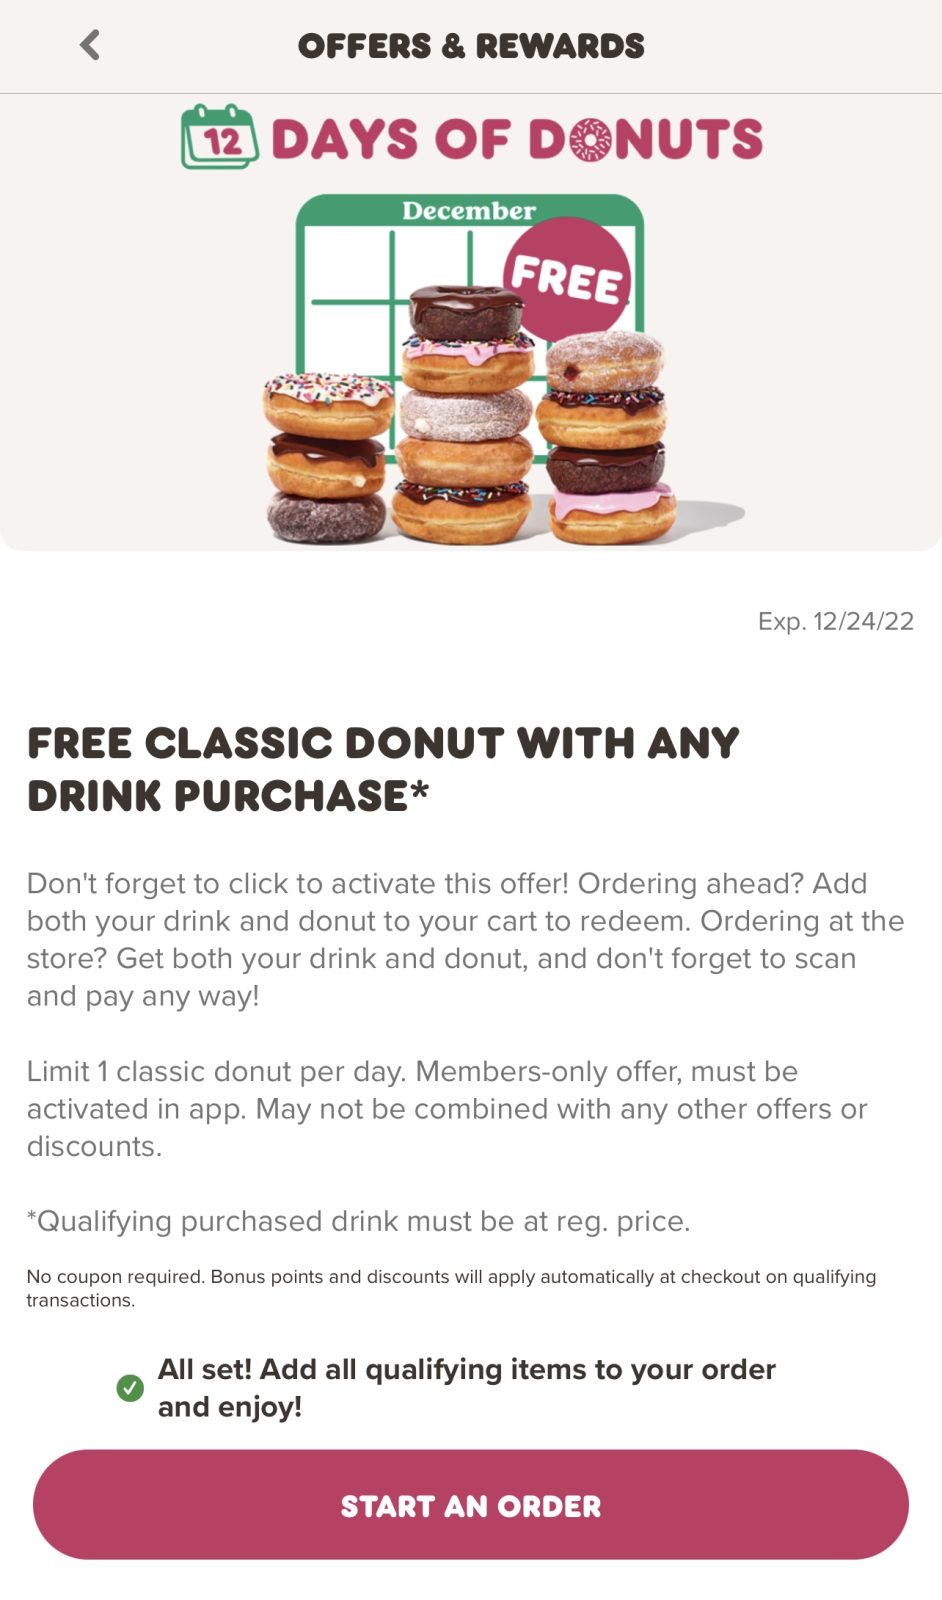 How To Redeem 12 Days of Donuts